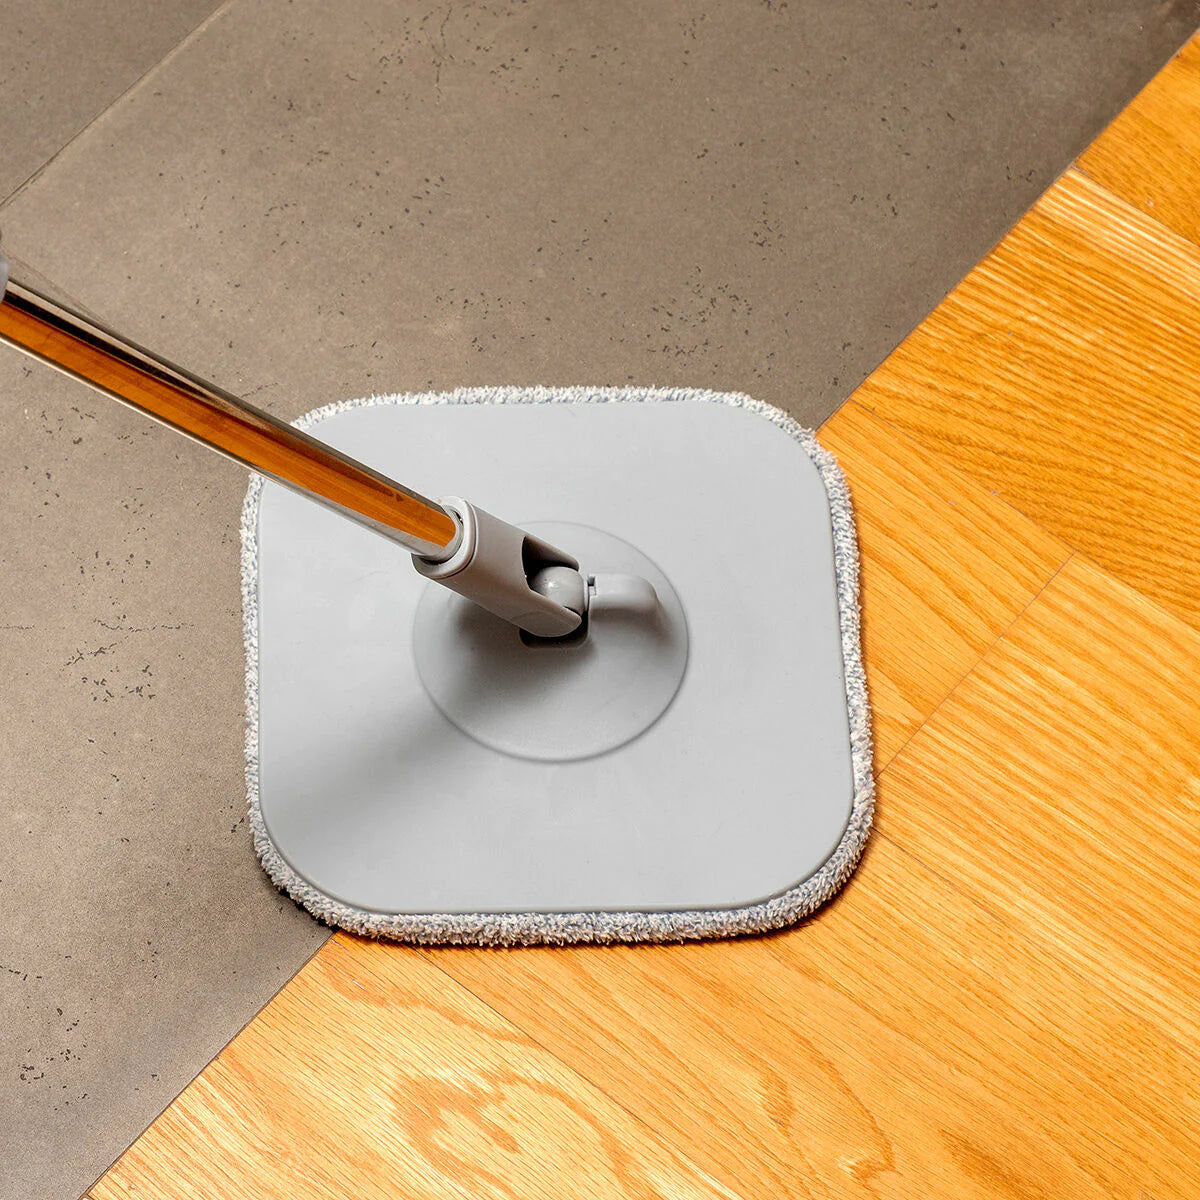 Self-Cleaning Spin Mop with Separation Bucket